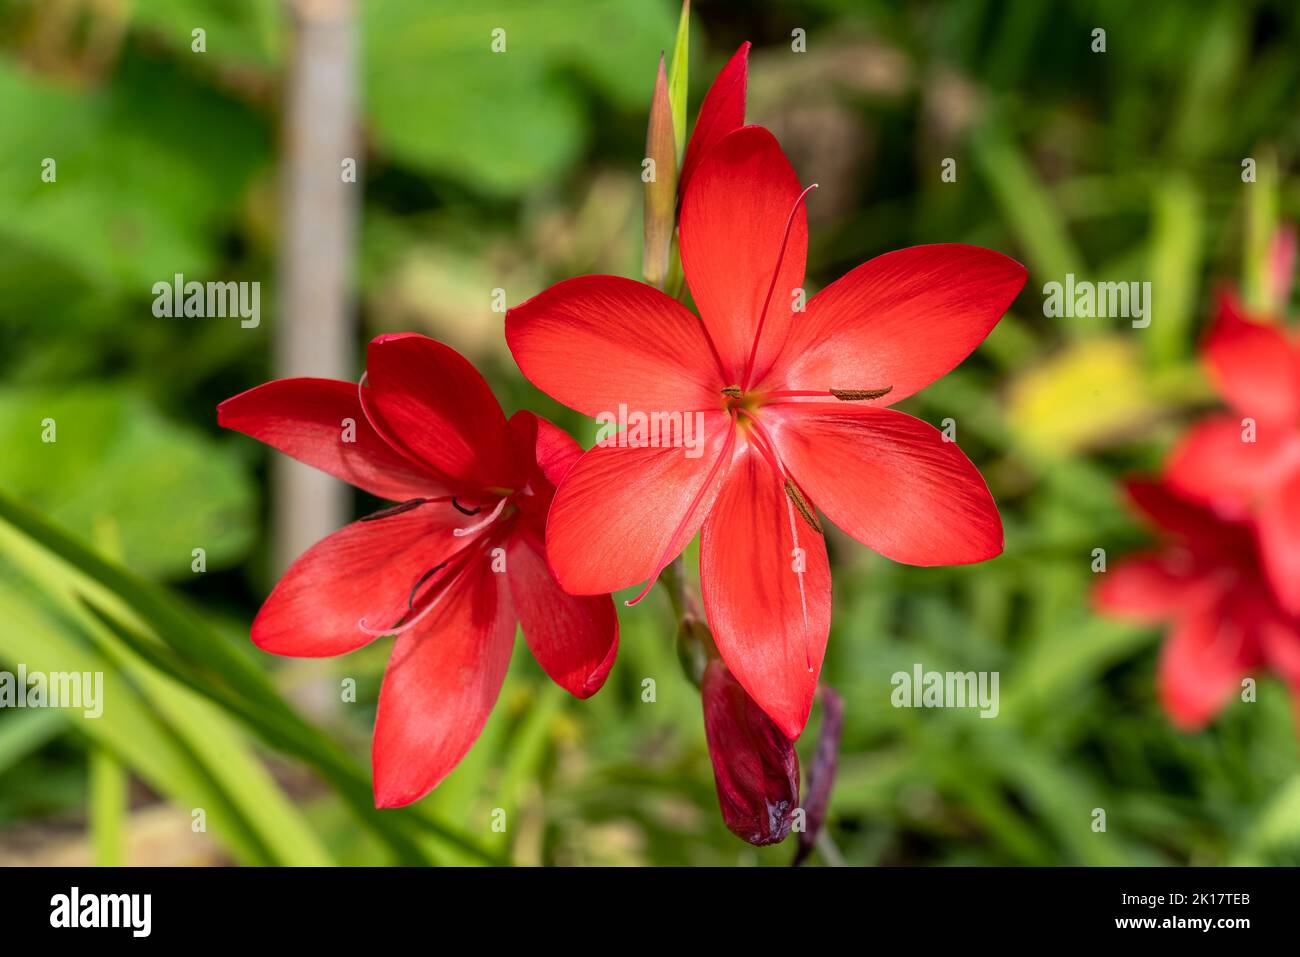 Hesperantha coccinea 'Major' a summer autumn fall flowering plant with a scarlet red summertime flower commonly known as crimson flag lily, stock phot Stock Photo